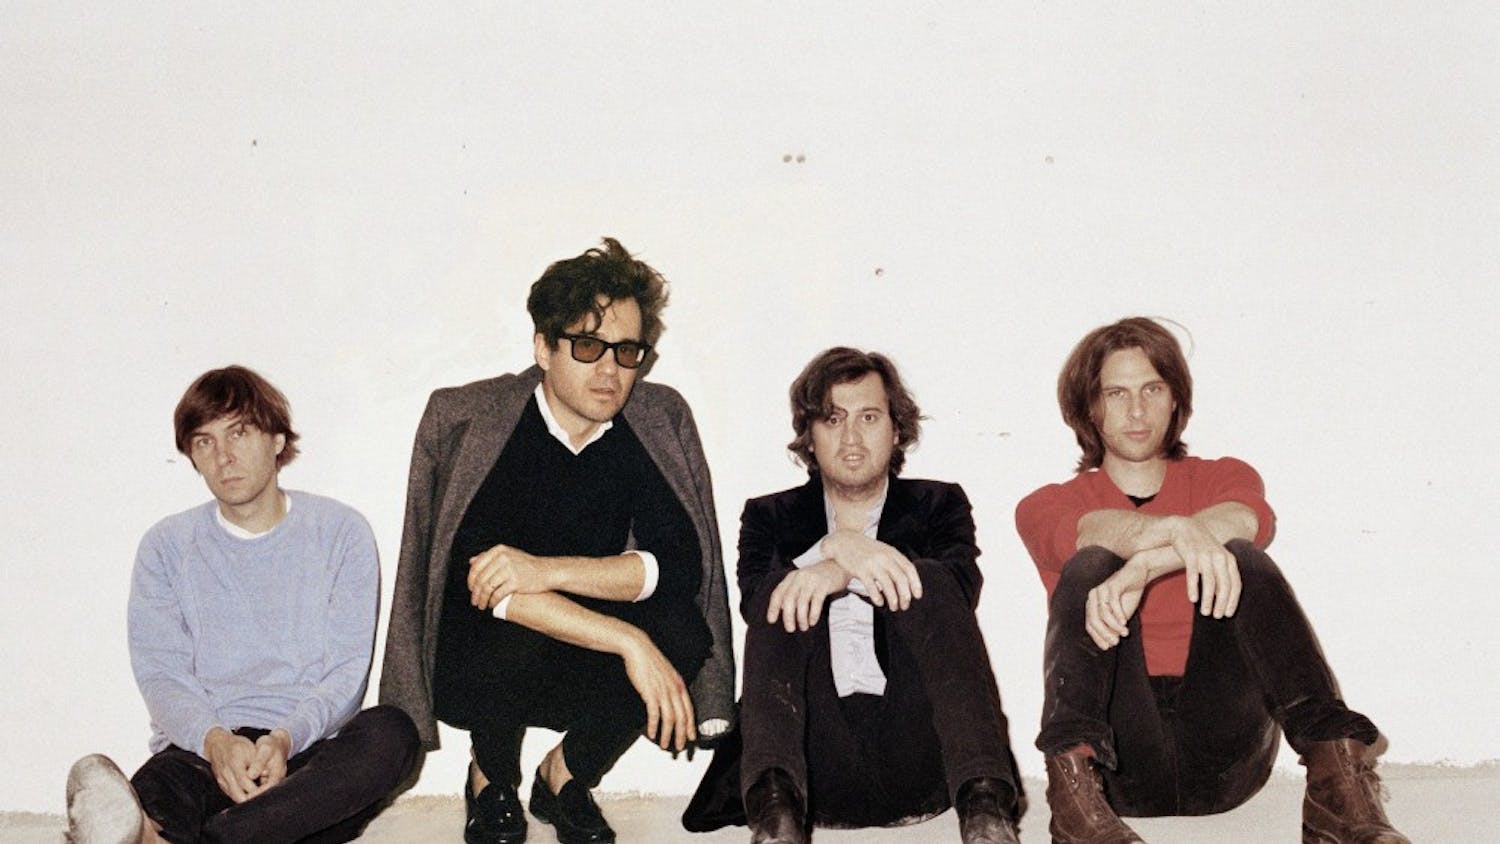 	French band Phoenix released its latest album, “Bankrupt!,” after a set on SNL.